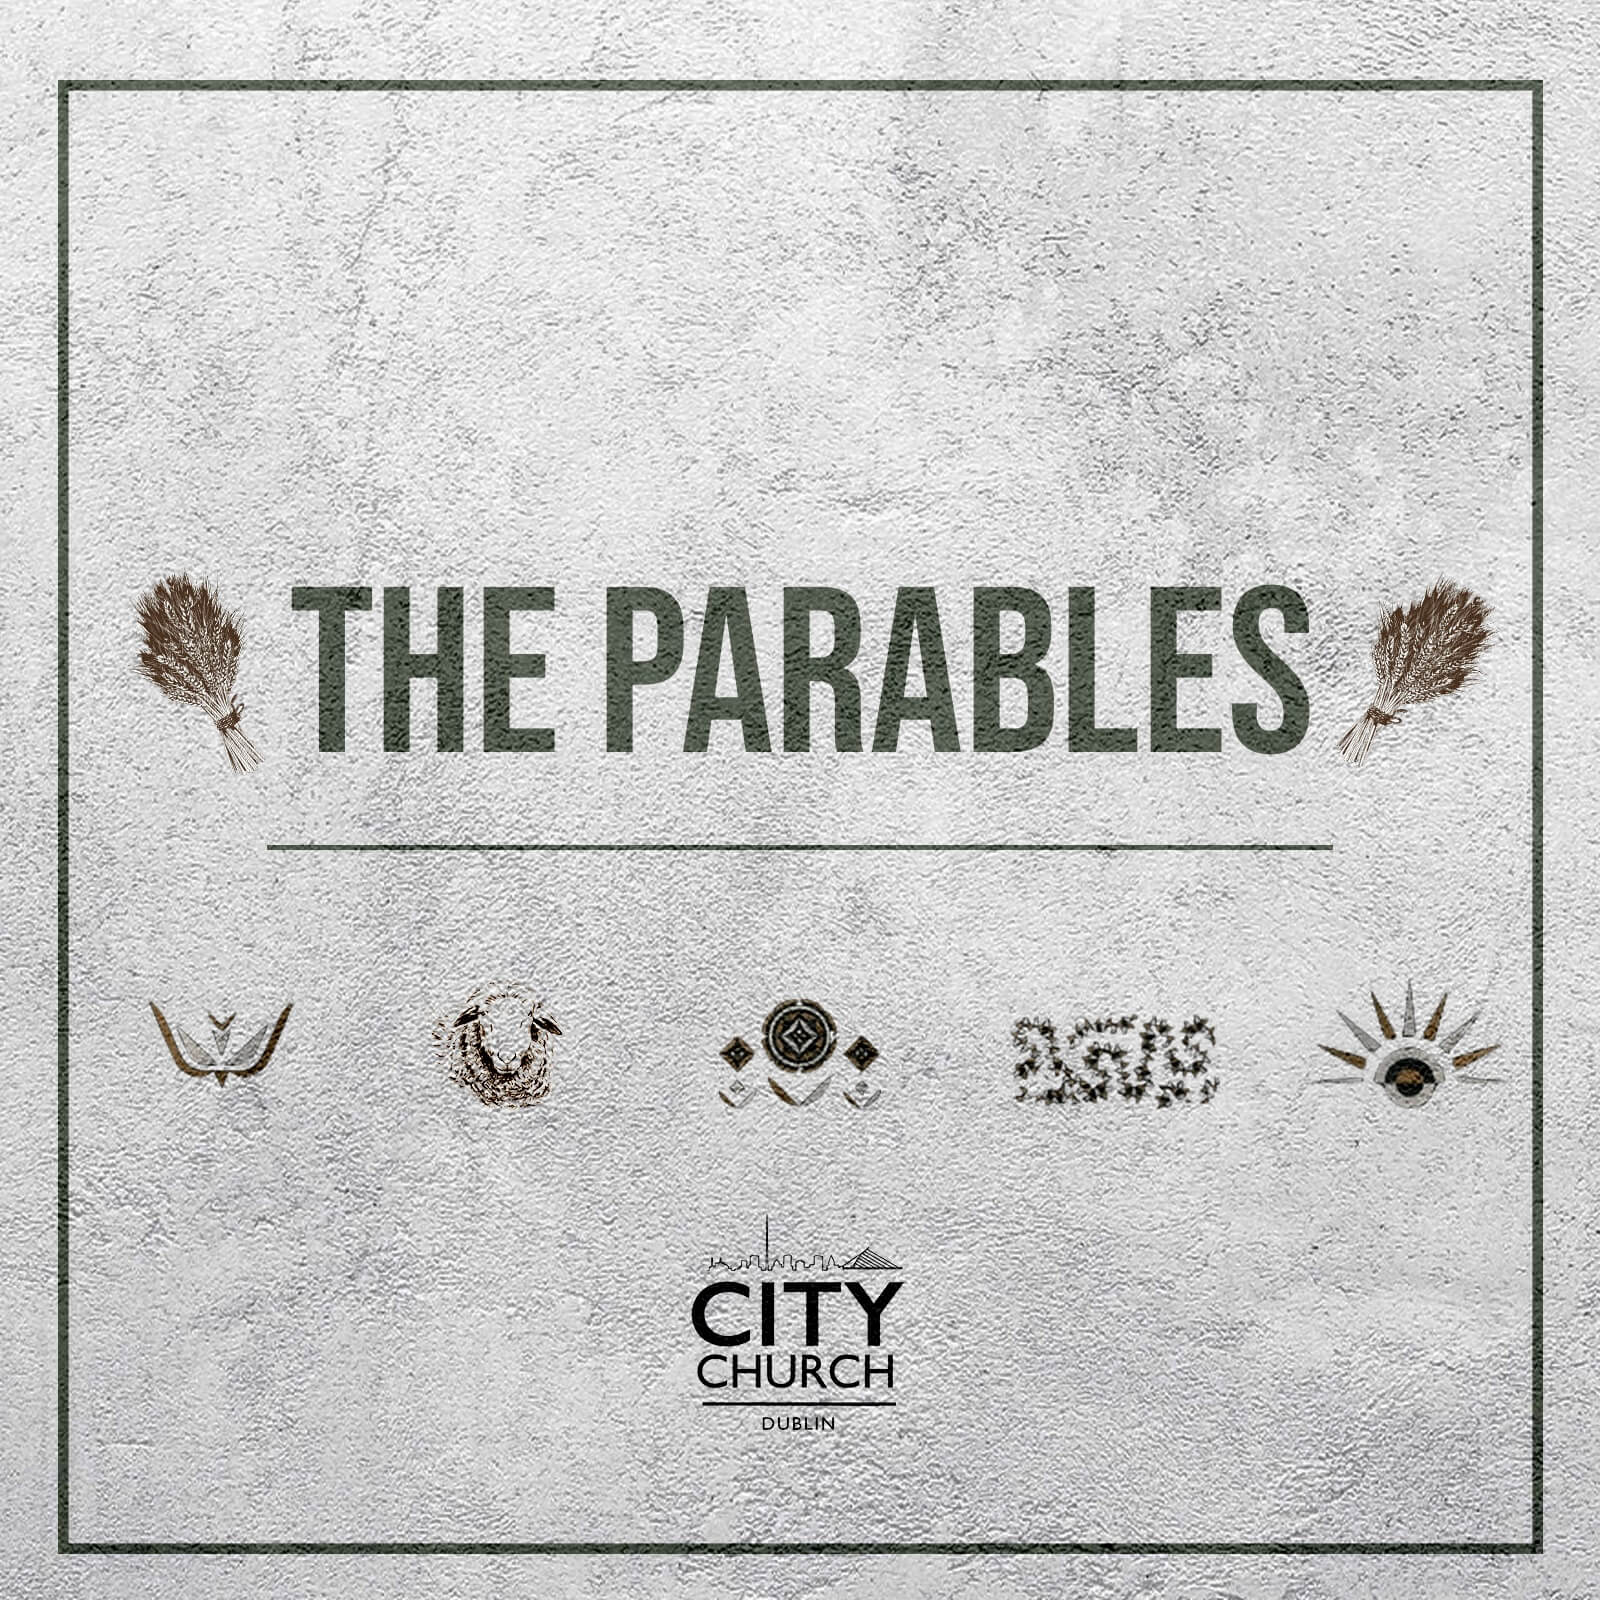 Matthew 25:14-29 - The Parables